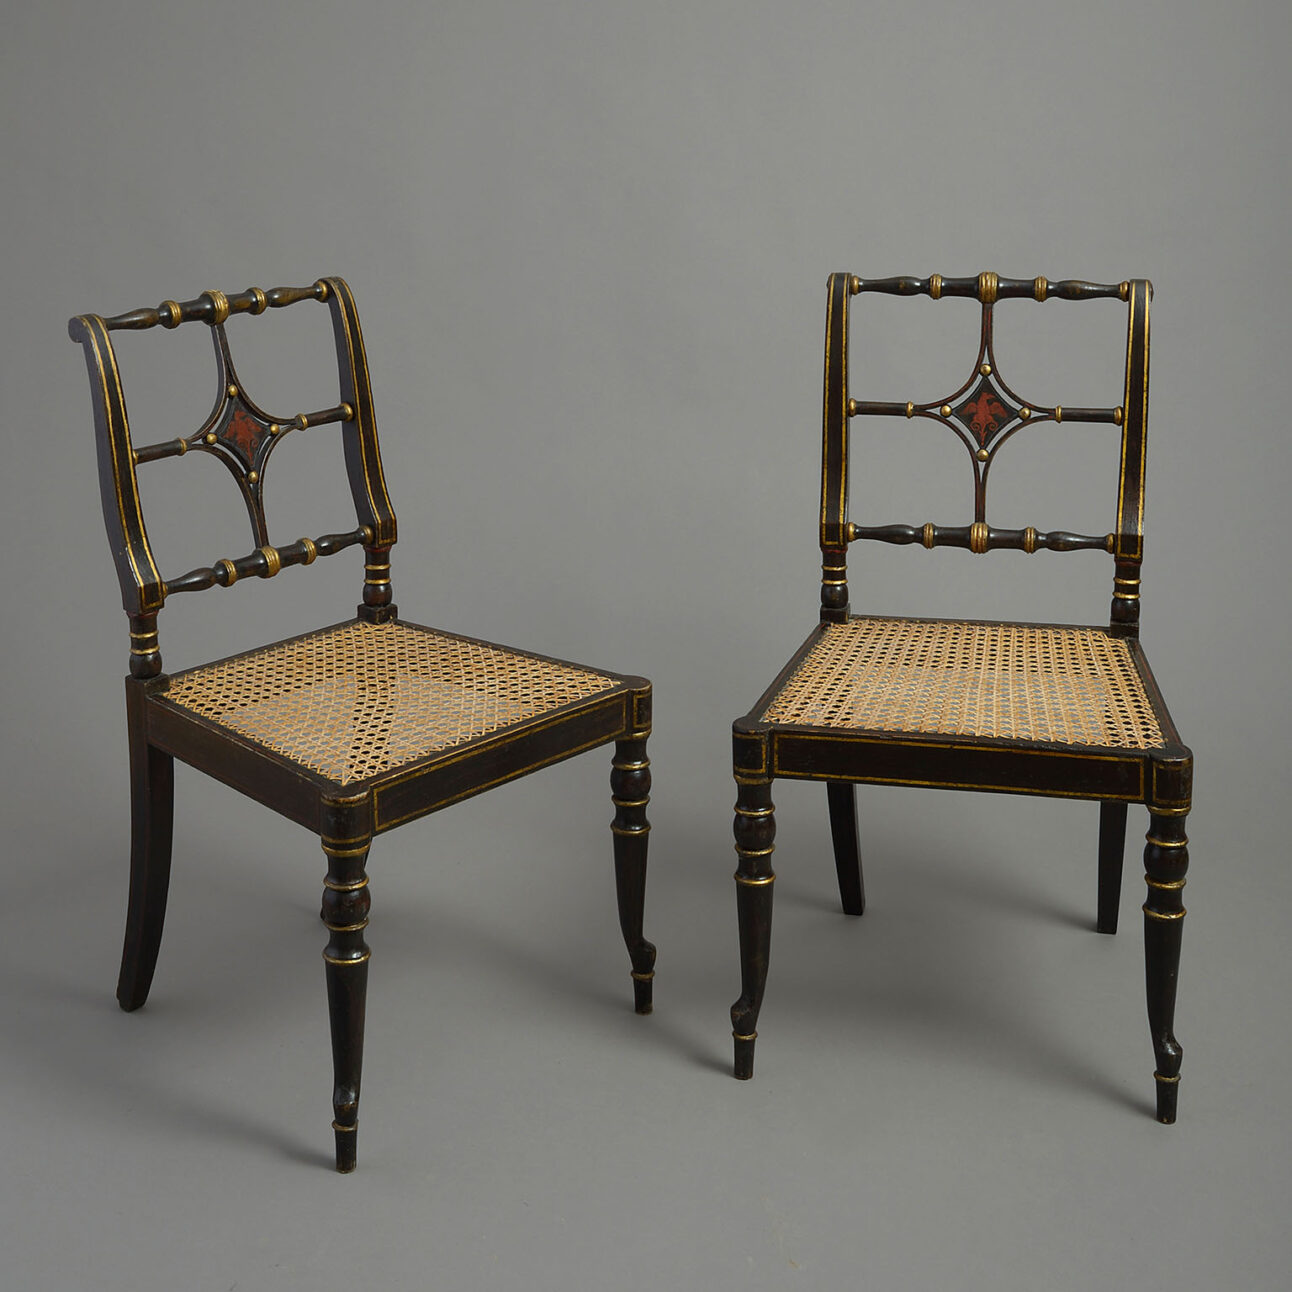 Pair of George III japanned chairs in the manner of Chippendale the younger